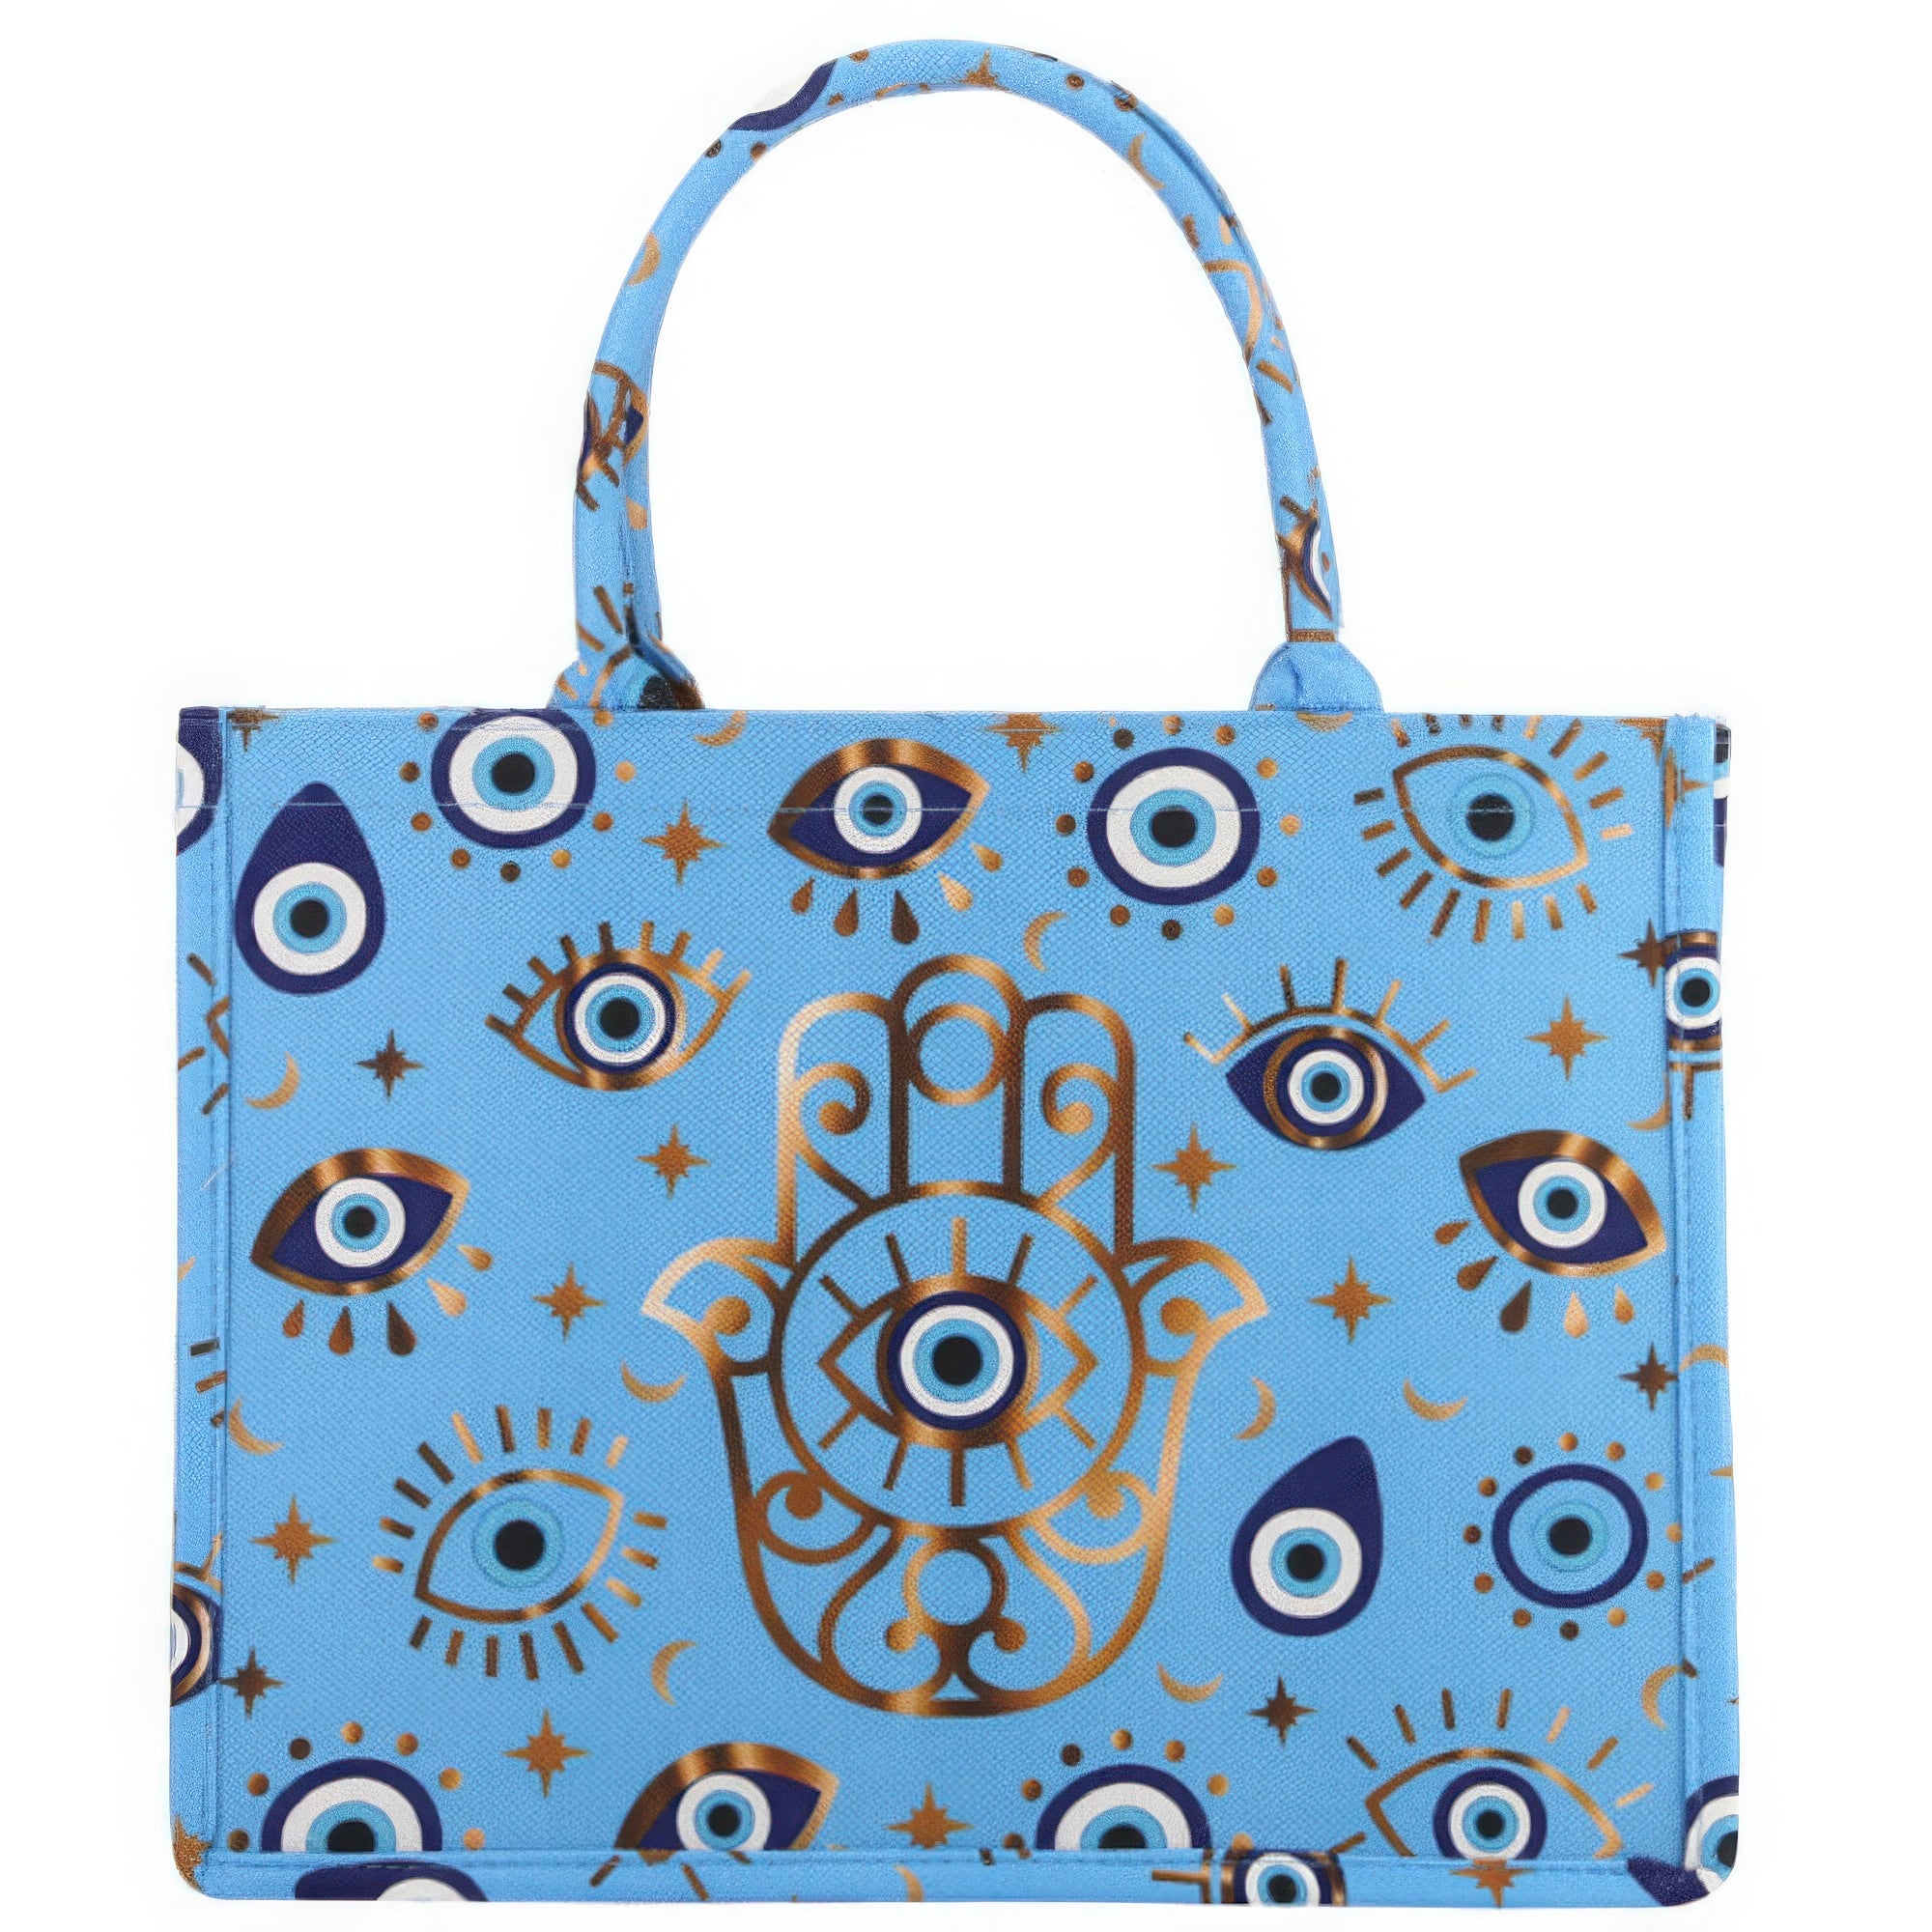 Evil Eye Hamsa Print Tote Bag | ACCESSORIES, CCPRODUCTS, HANDBAGS, NEW ARRIVALS, Pink, White | Bodiied